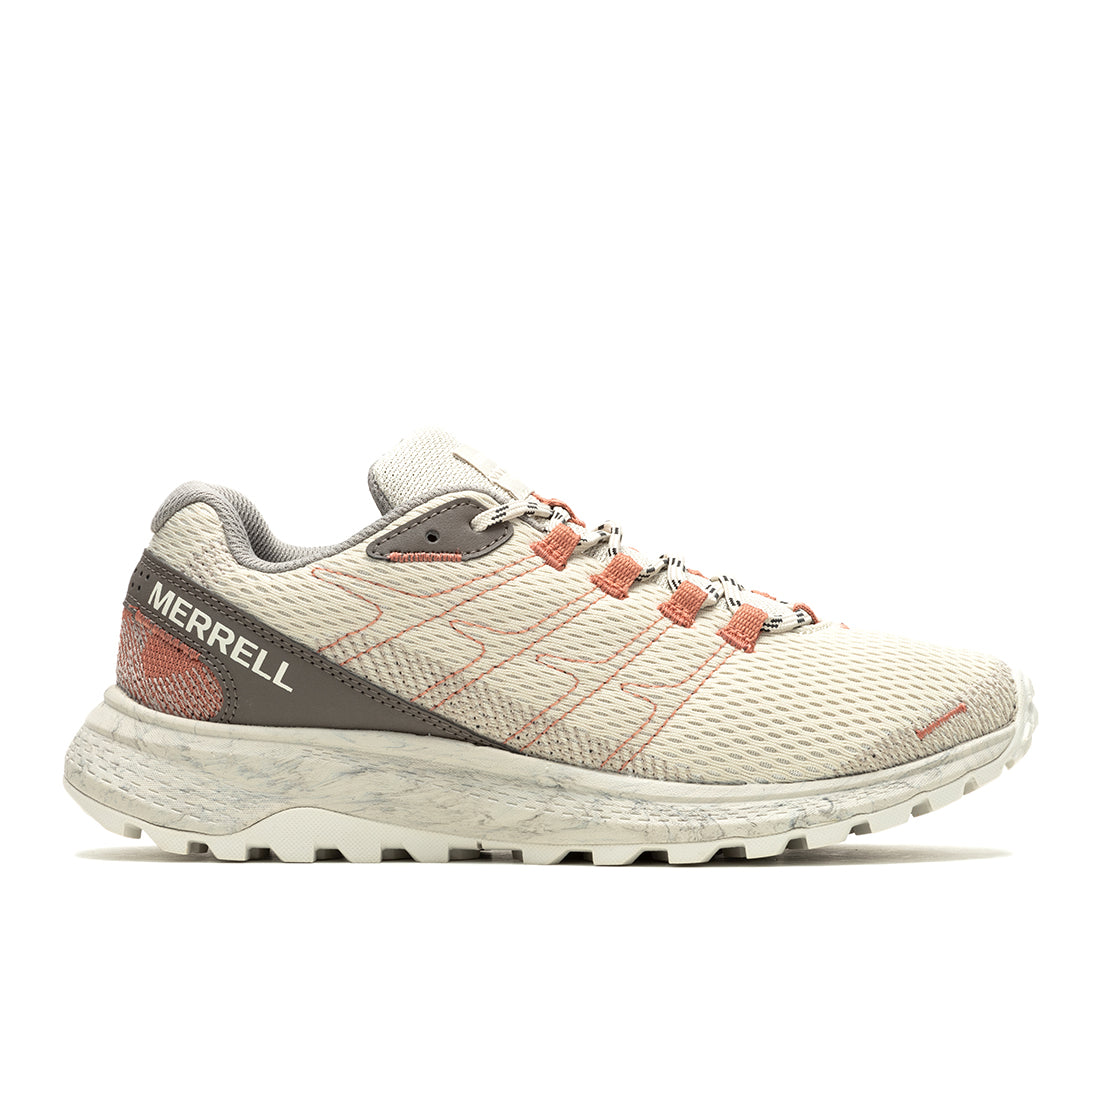 Fly Strike - Moonbeam/Oyster Womens Trail Running Shoes